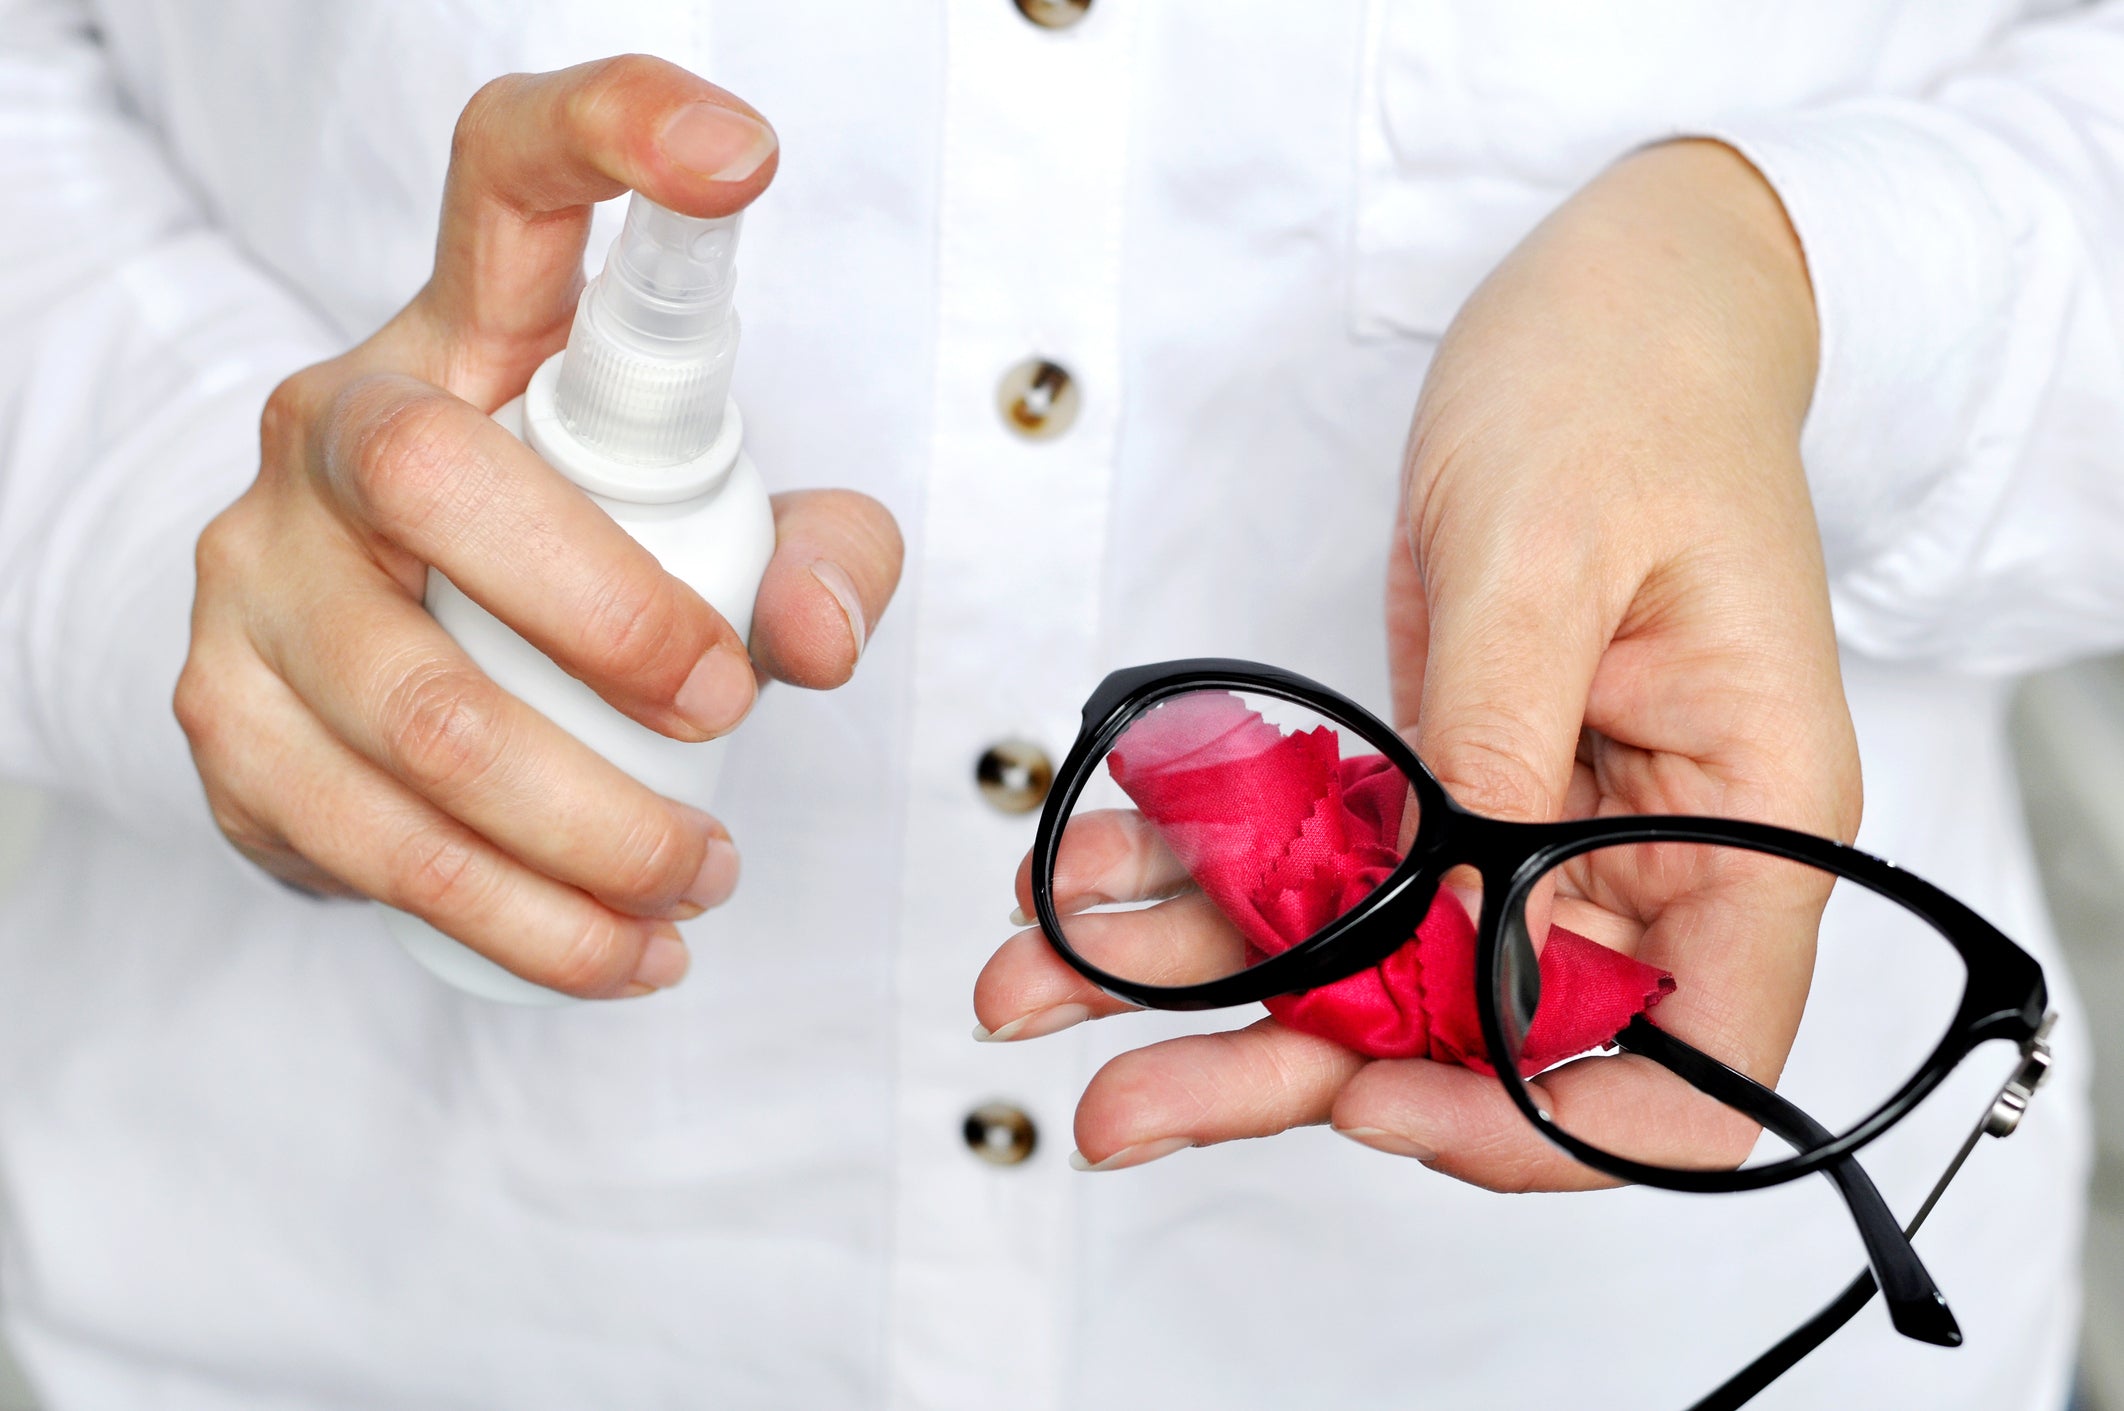 How to Make Eyeglass Cleaner at Home